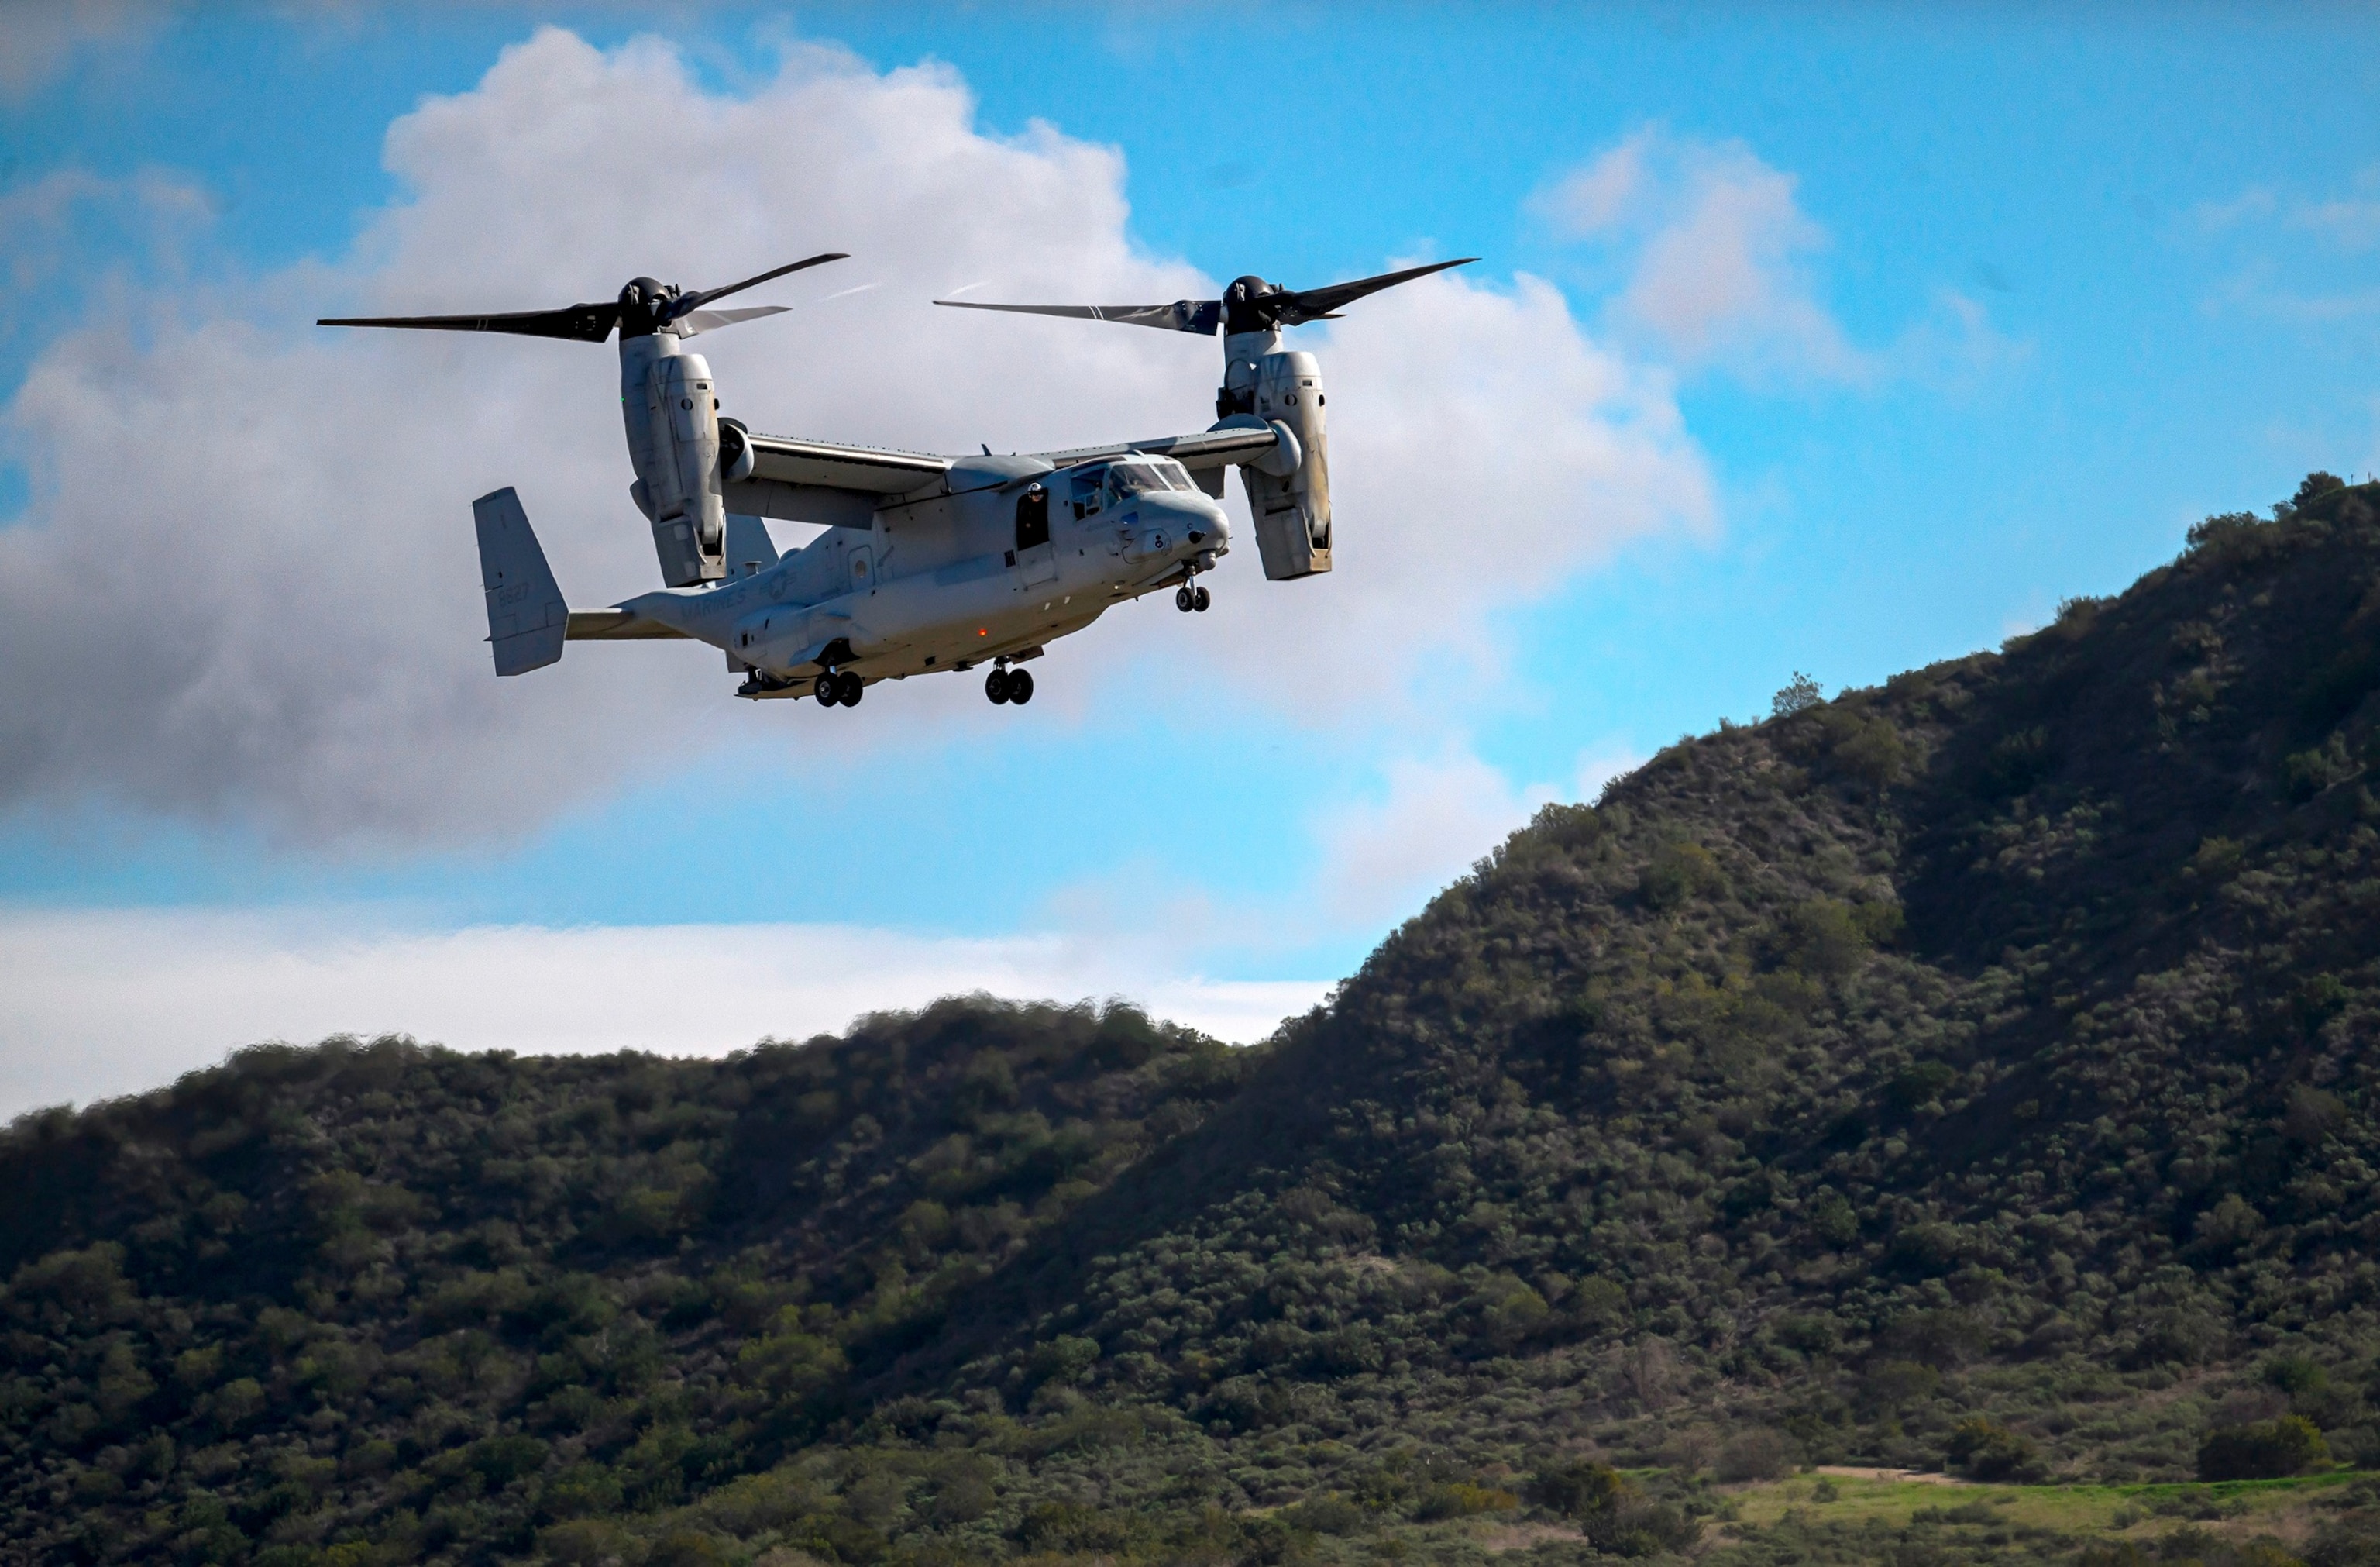 PHOTO: In this Dec. 5, 2022, file photo, a MV-22 Osprey aircraft is used during a training exercise at Camp Pendleton, California.